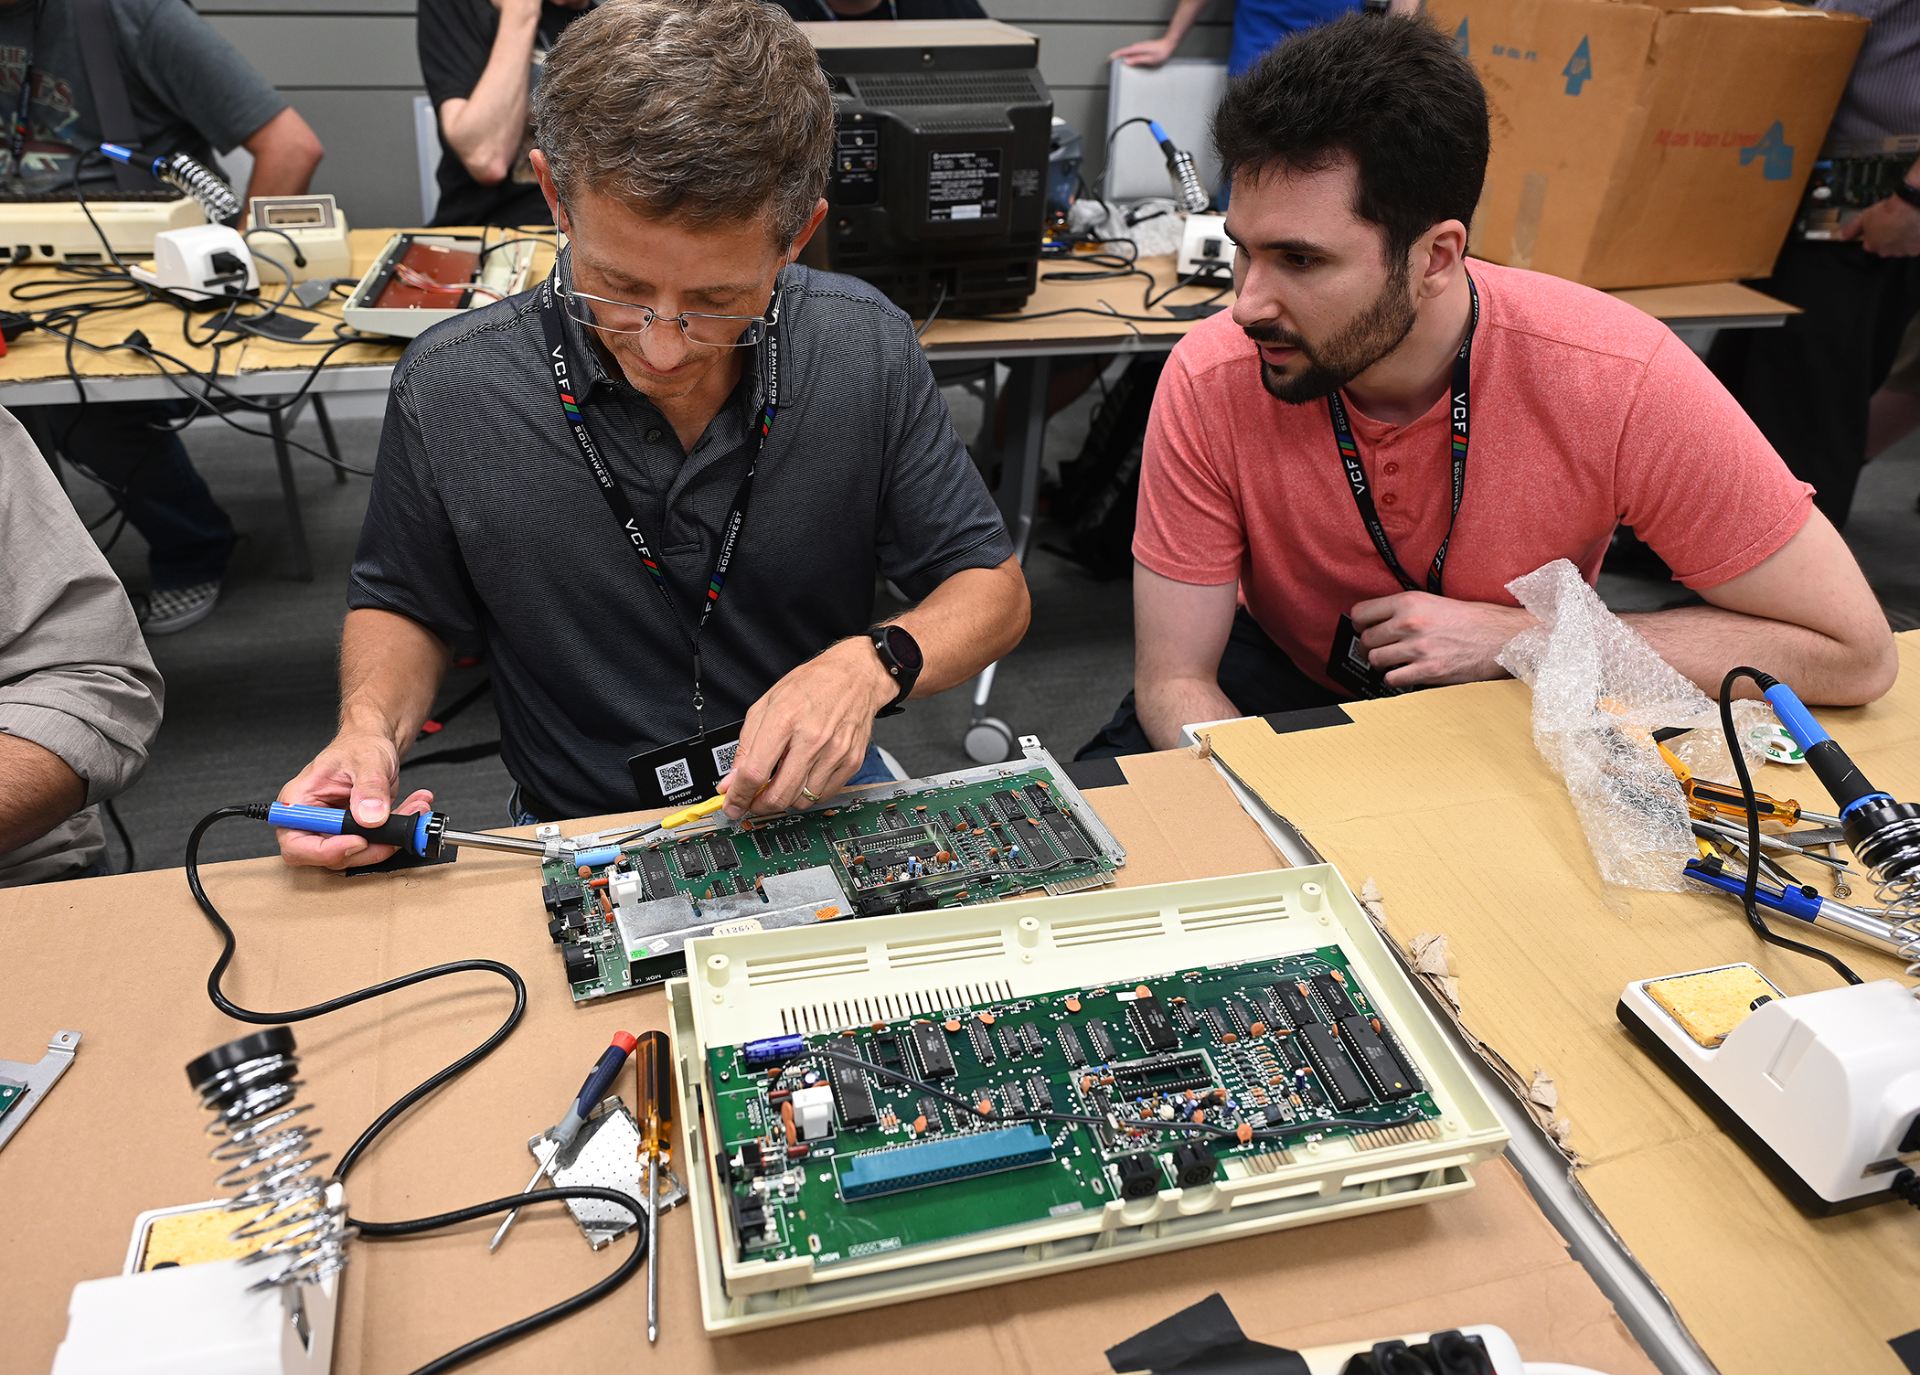 Two men repairing a vintage computer chip board.